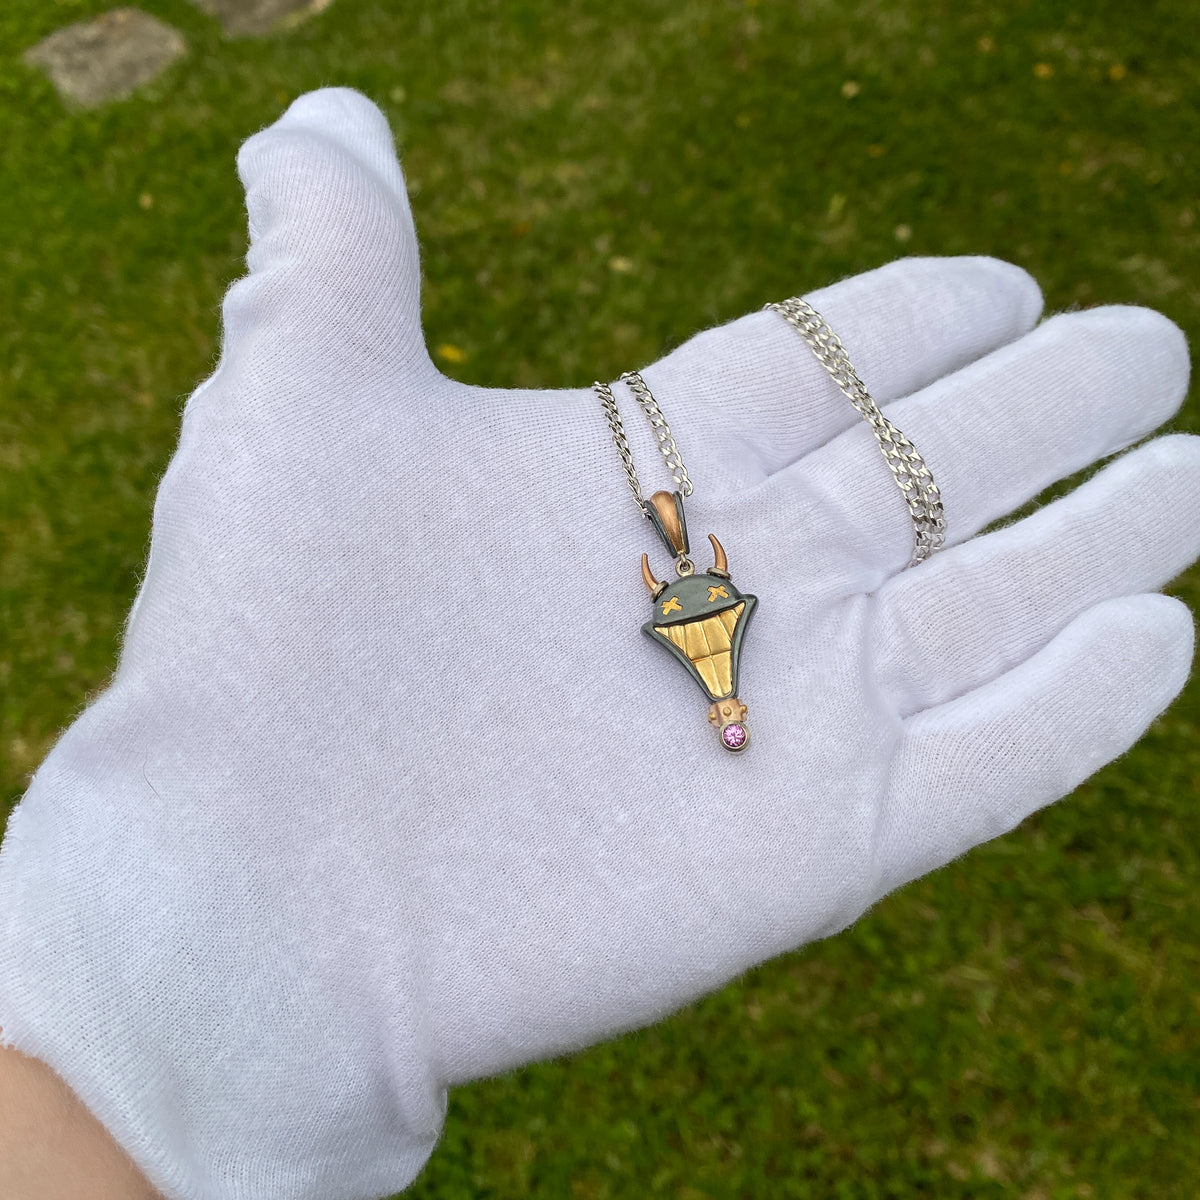 Smile Please hand crafted jewellery pendant. Hand crafted smile motif with horns in oxidised silver, 18ct yellow gold, rose gold, white gold and fine gold set with one round pink sapphire. On chain held in white gloved hand for scale